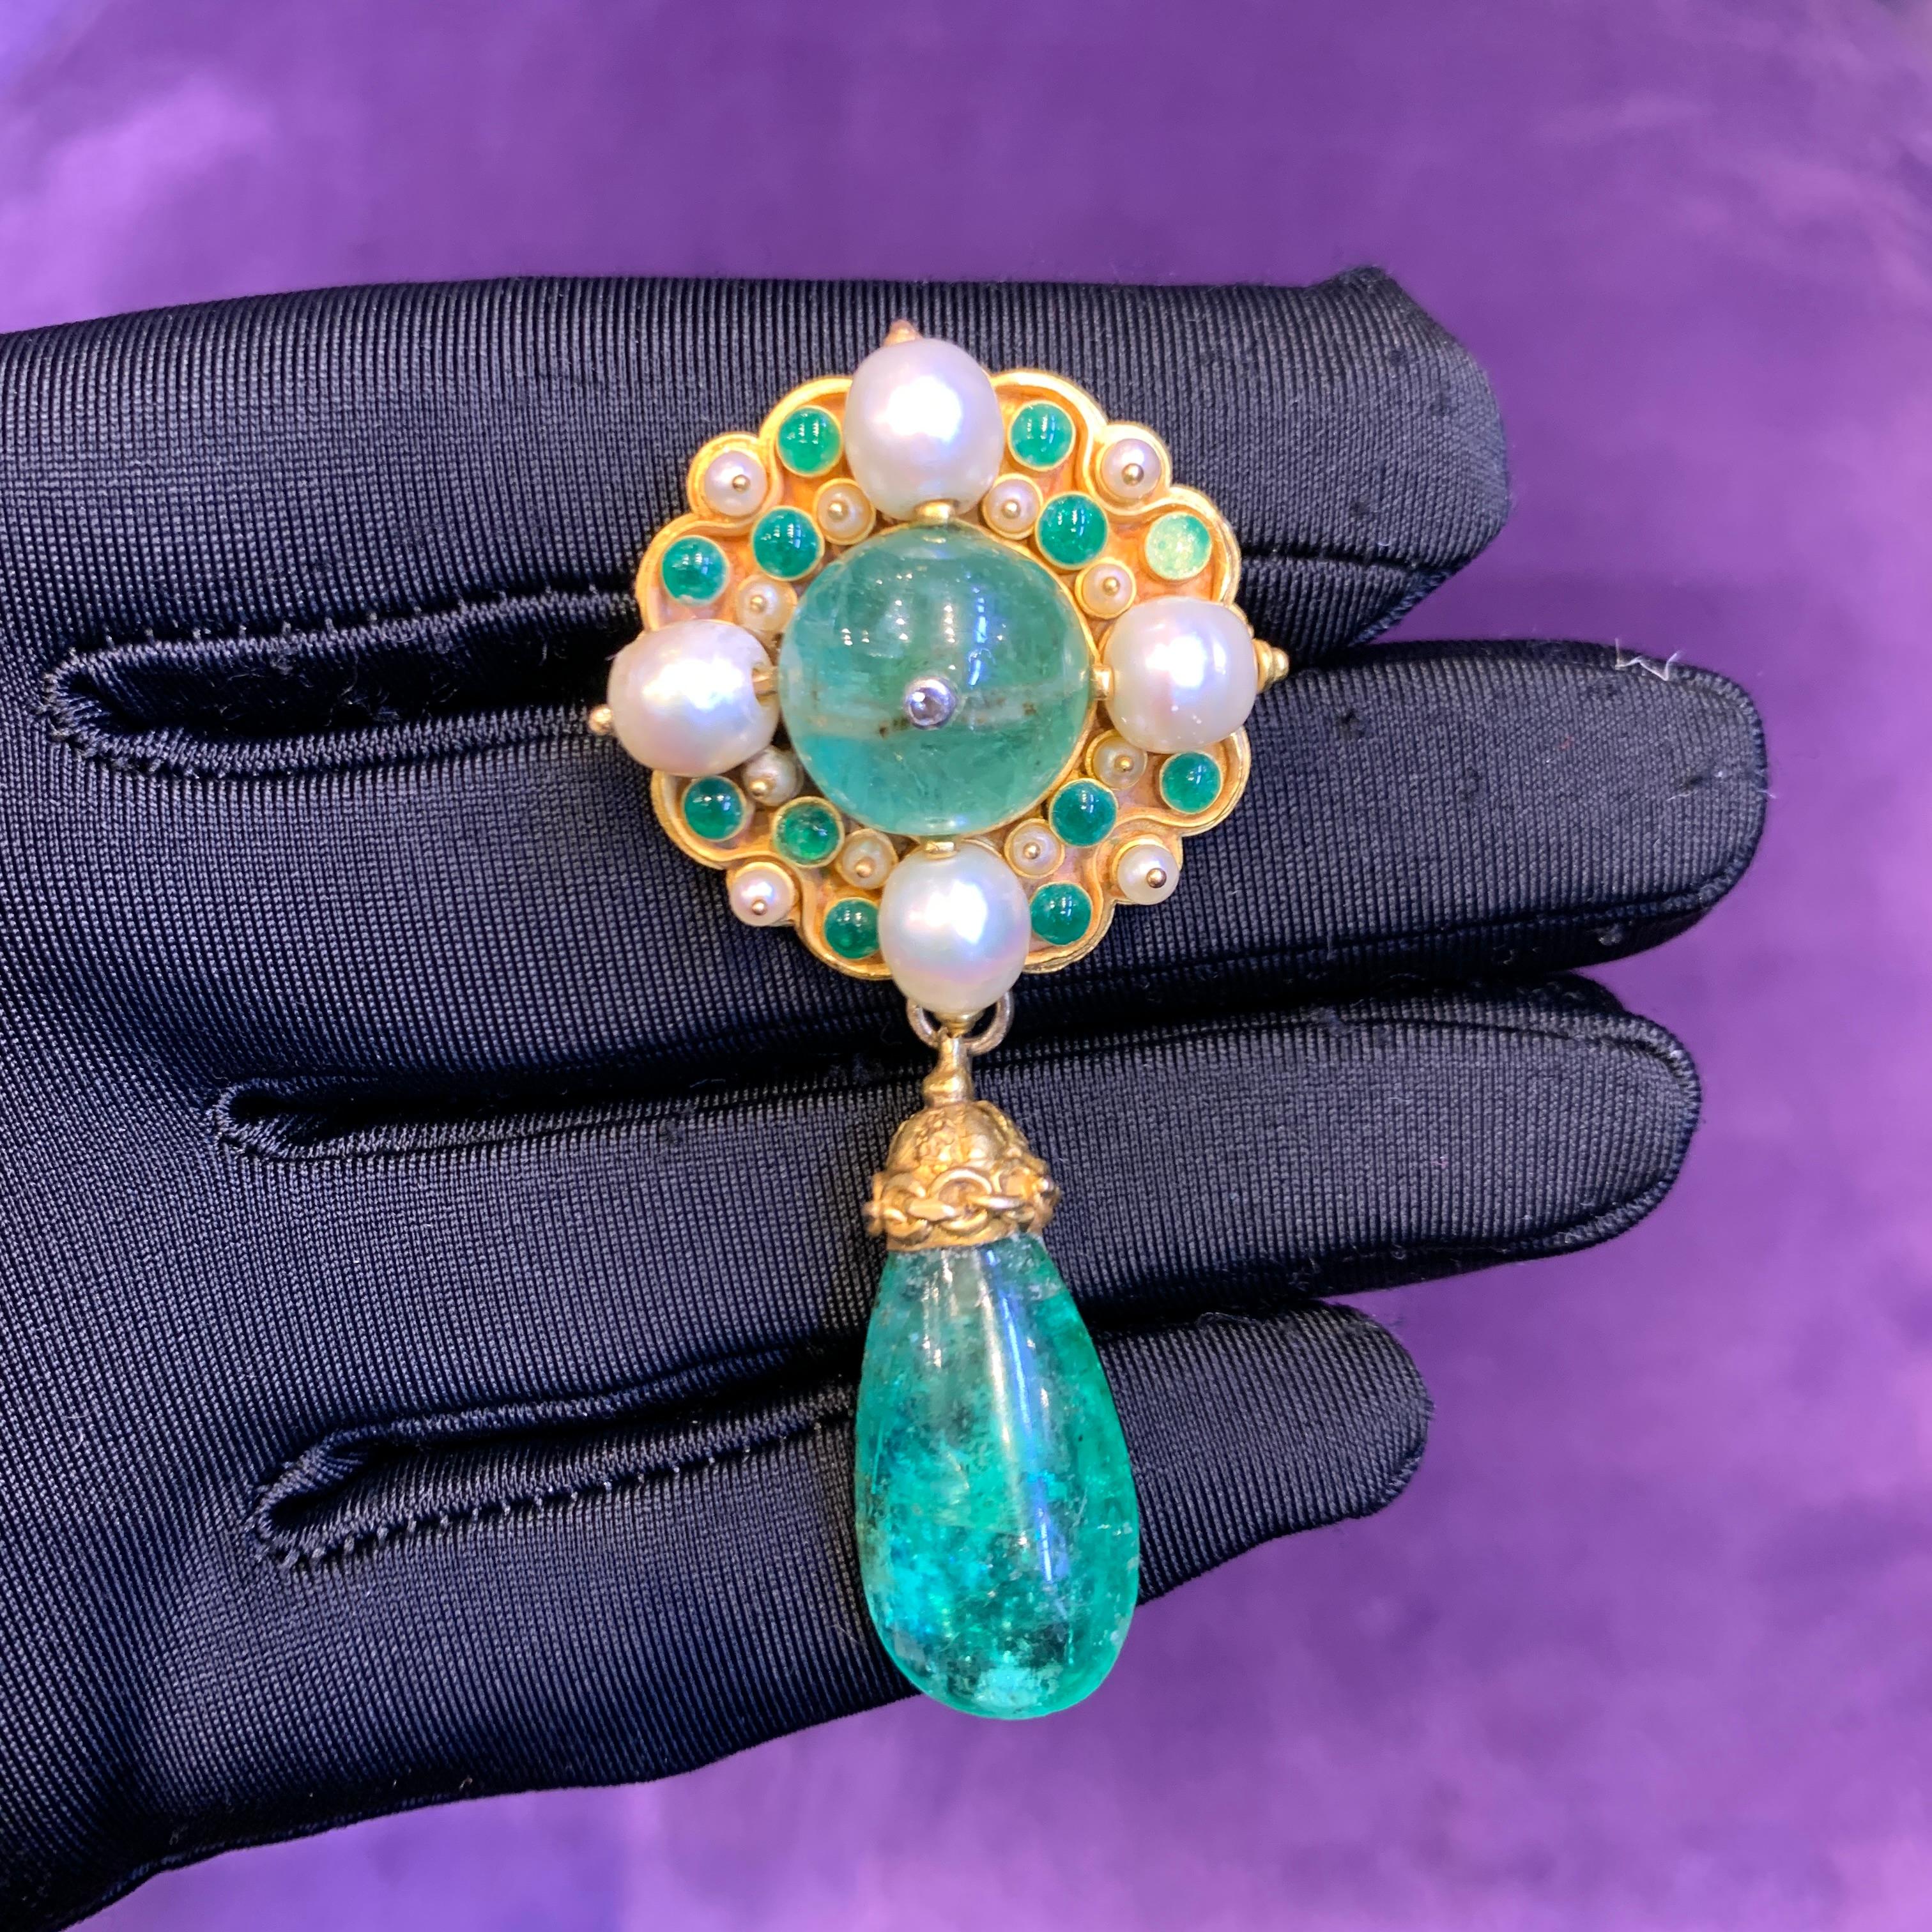 Antique Emerald Pearl and enamel Brooch 

Made Circa 1907. An antique enamel brooch consisting of pearls & emeralds 

Measurements: 2.5